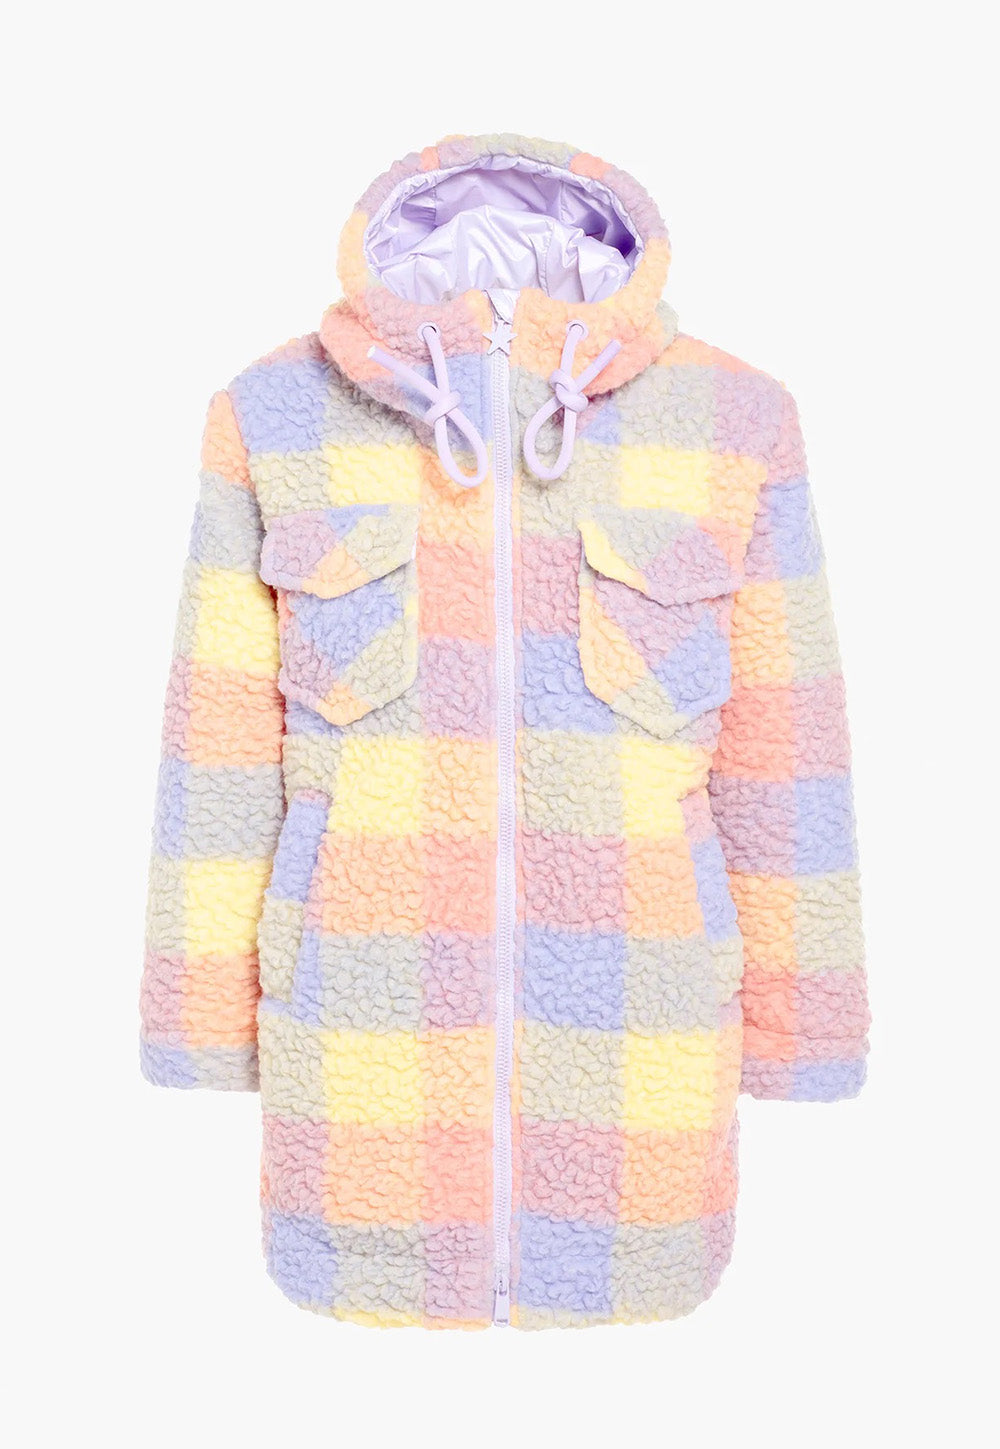 Chad Jacket - Pastel Check sold by Angel Divine